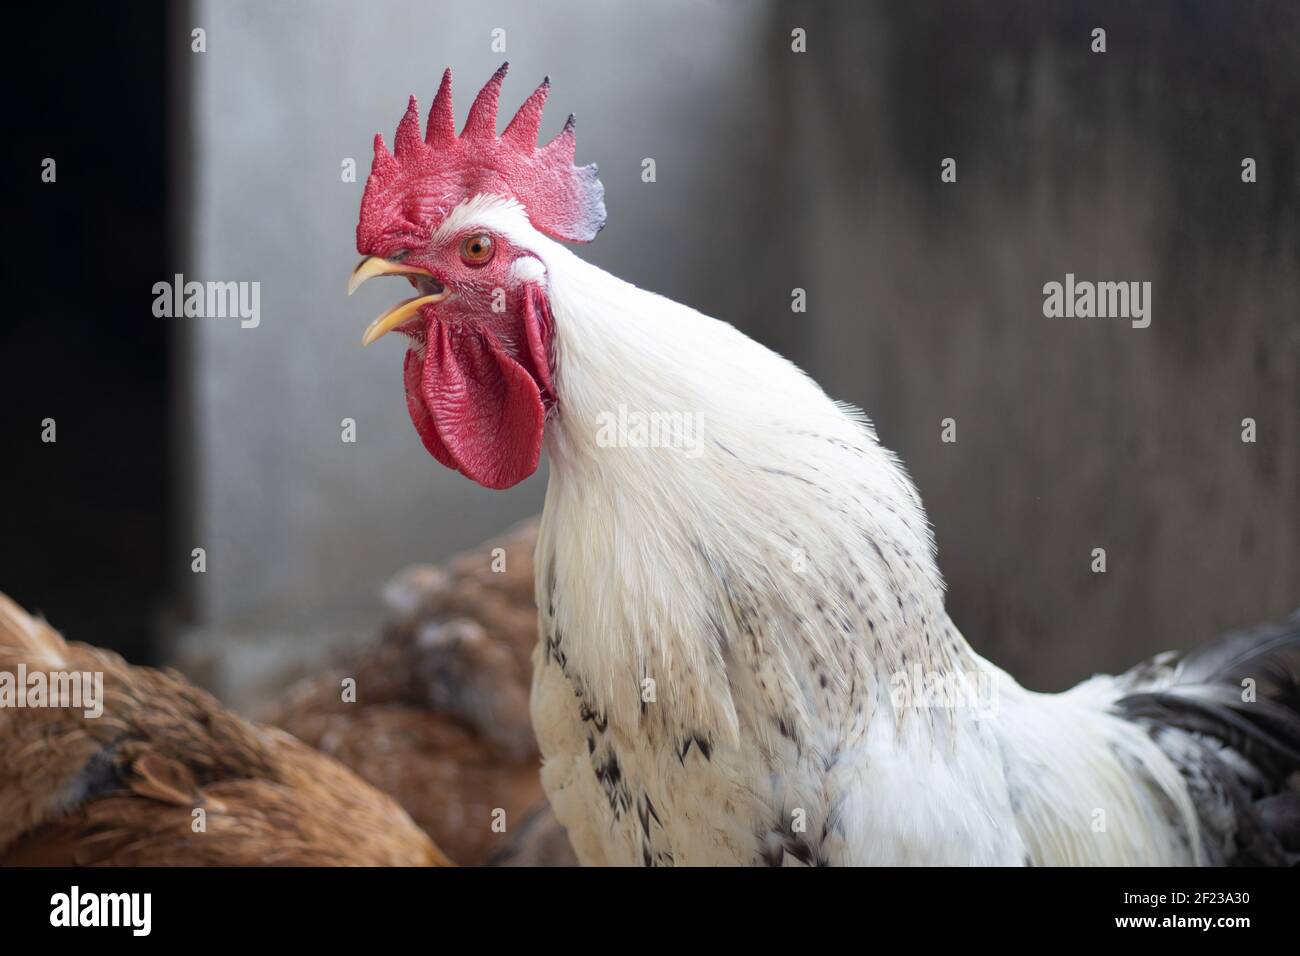 Fully grown adult white rooster crowing in the morning. Domestic pet kuroiler rooster crows Stock Photo